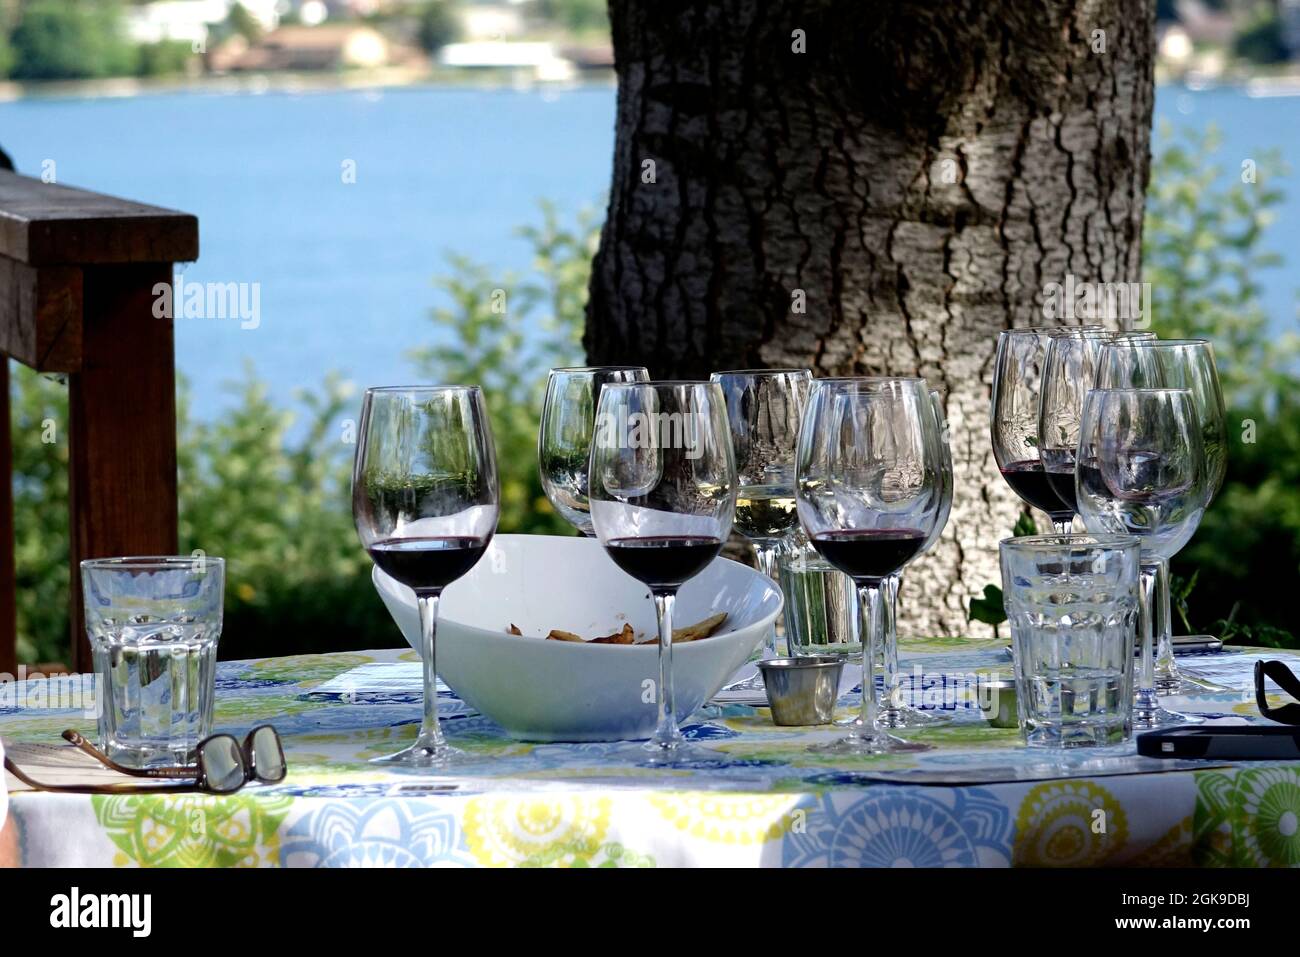 https://c8.alamy.com/comp/2GK9DBJ/wine-glasses-lined-up-for-a-dinner-party-in-lake-chelan-washingtons-vin-du-lac-winery-overlooking-the-lake-2GK9DBJ.jpg